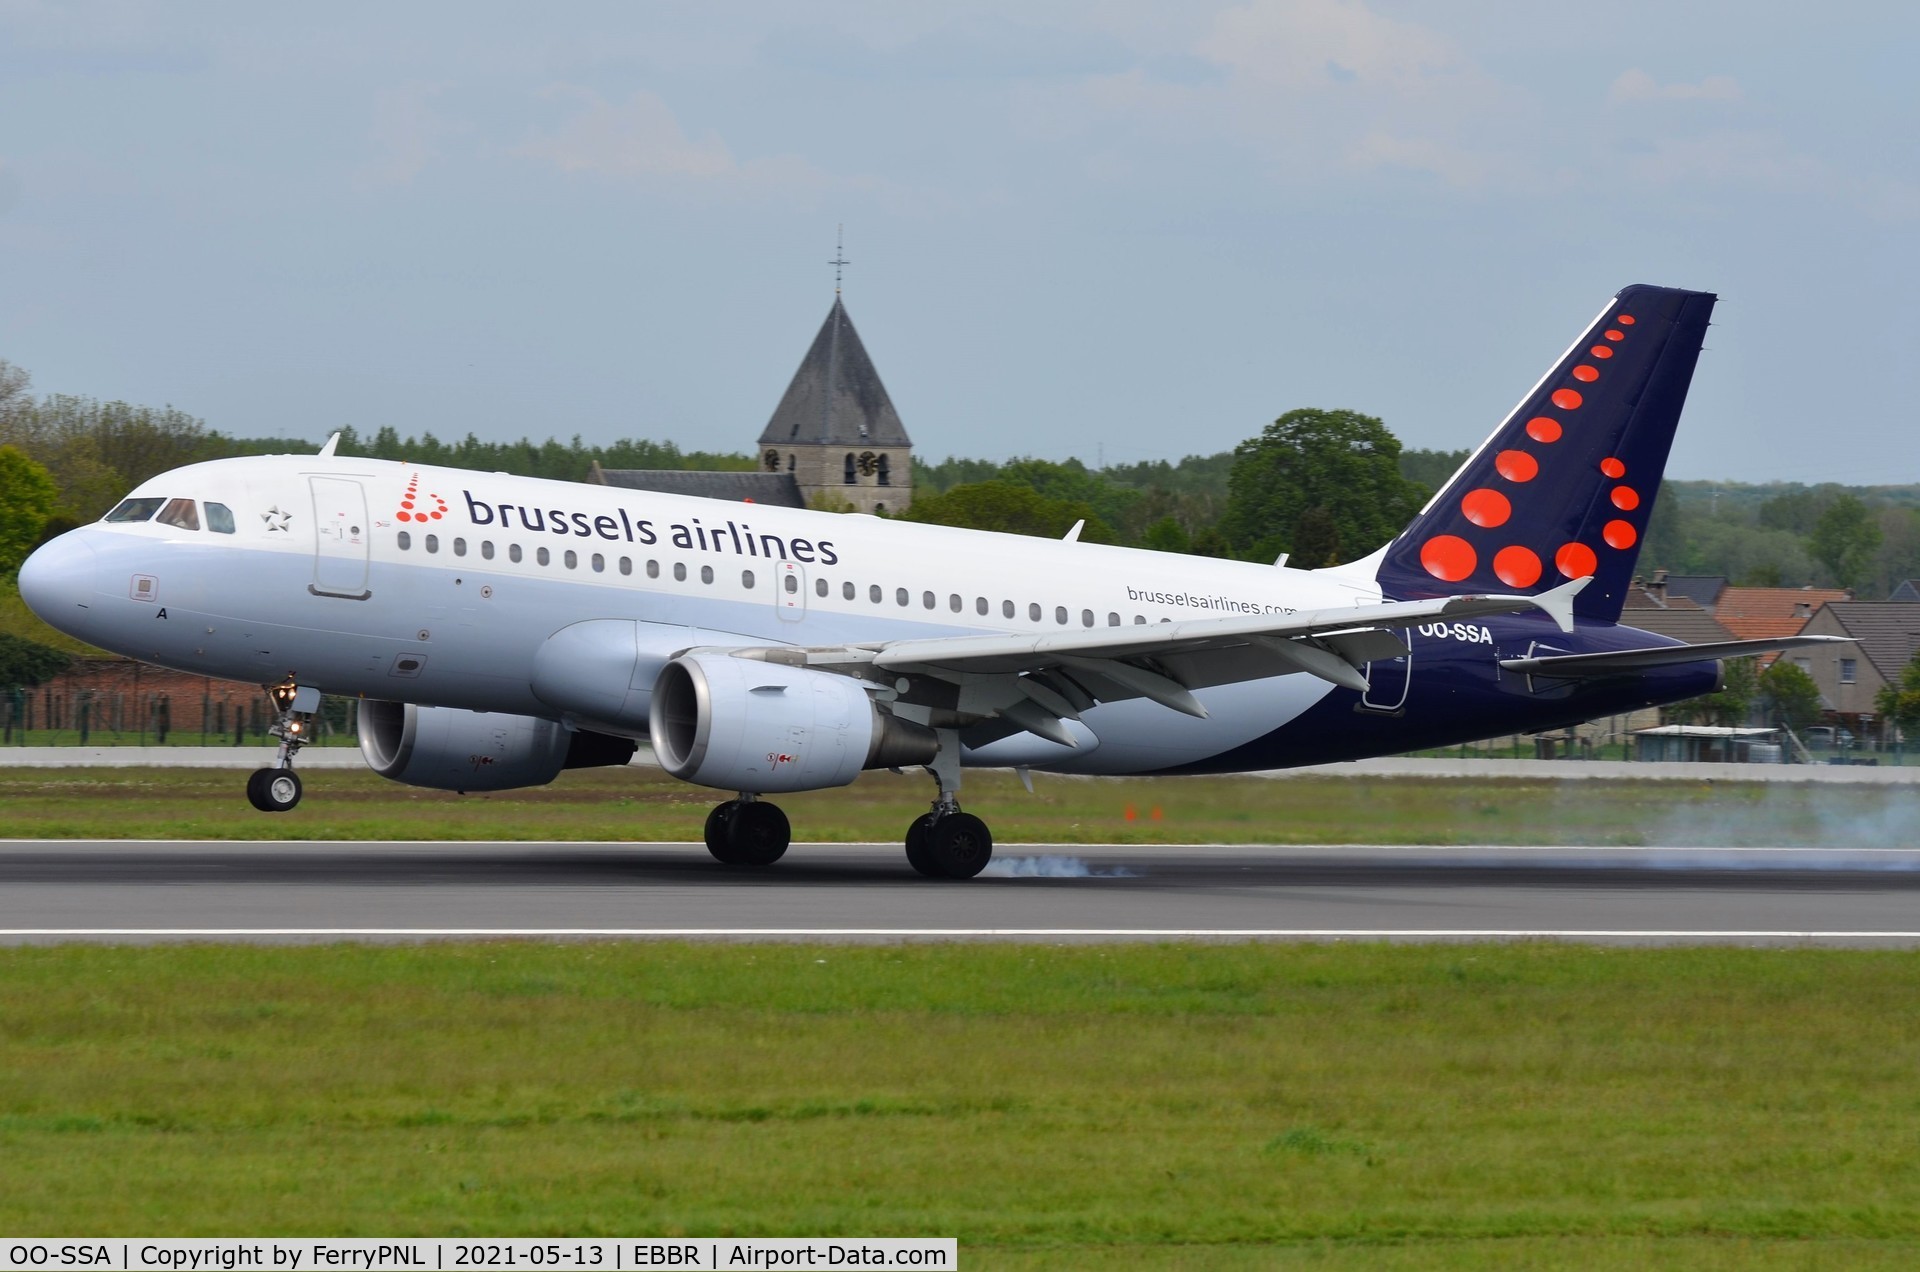 OO-SSA, 2005 Airbus A319-111 C/N 2392, Arrival of Brussels A319